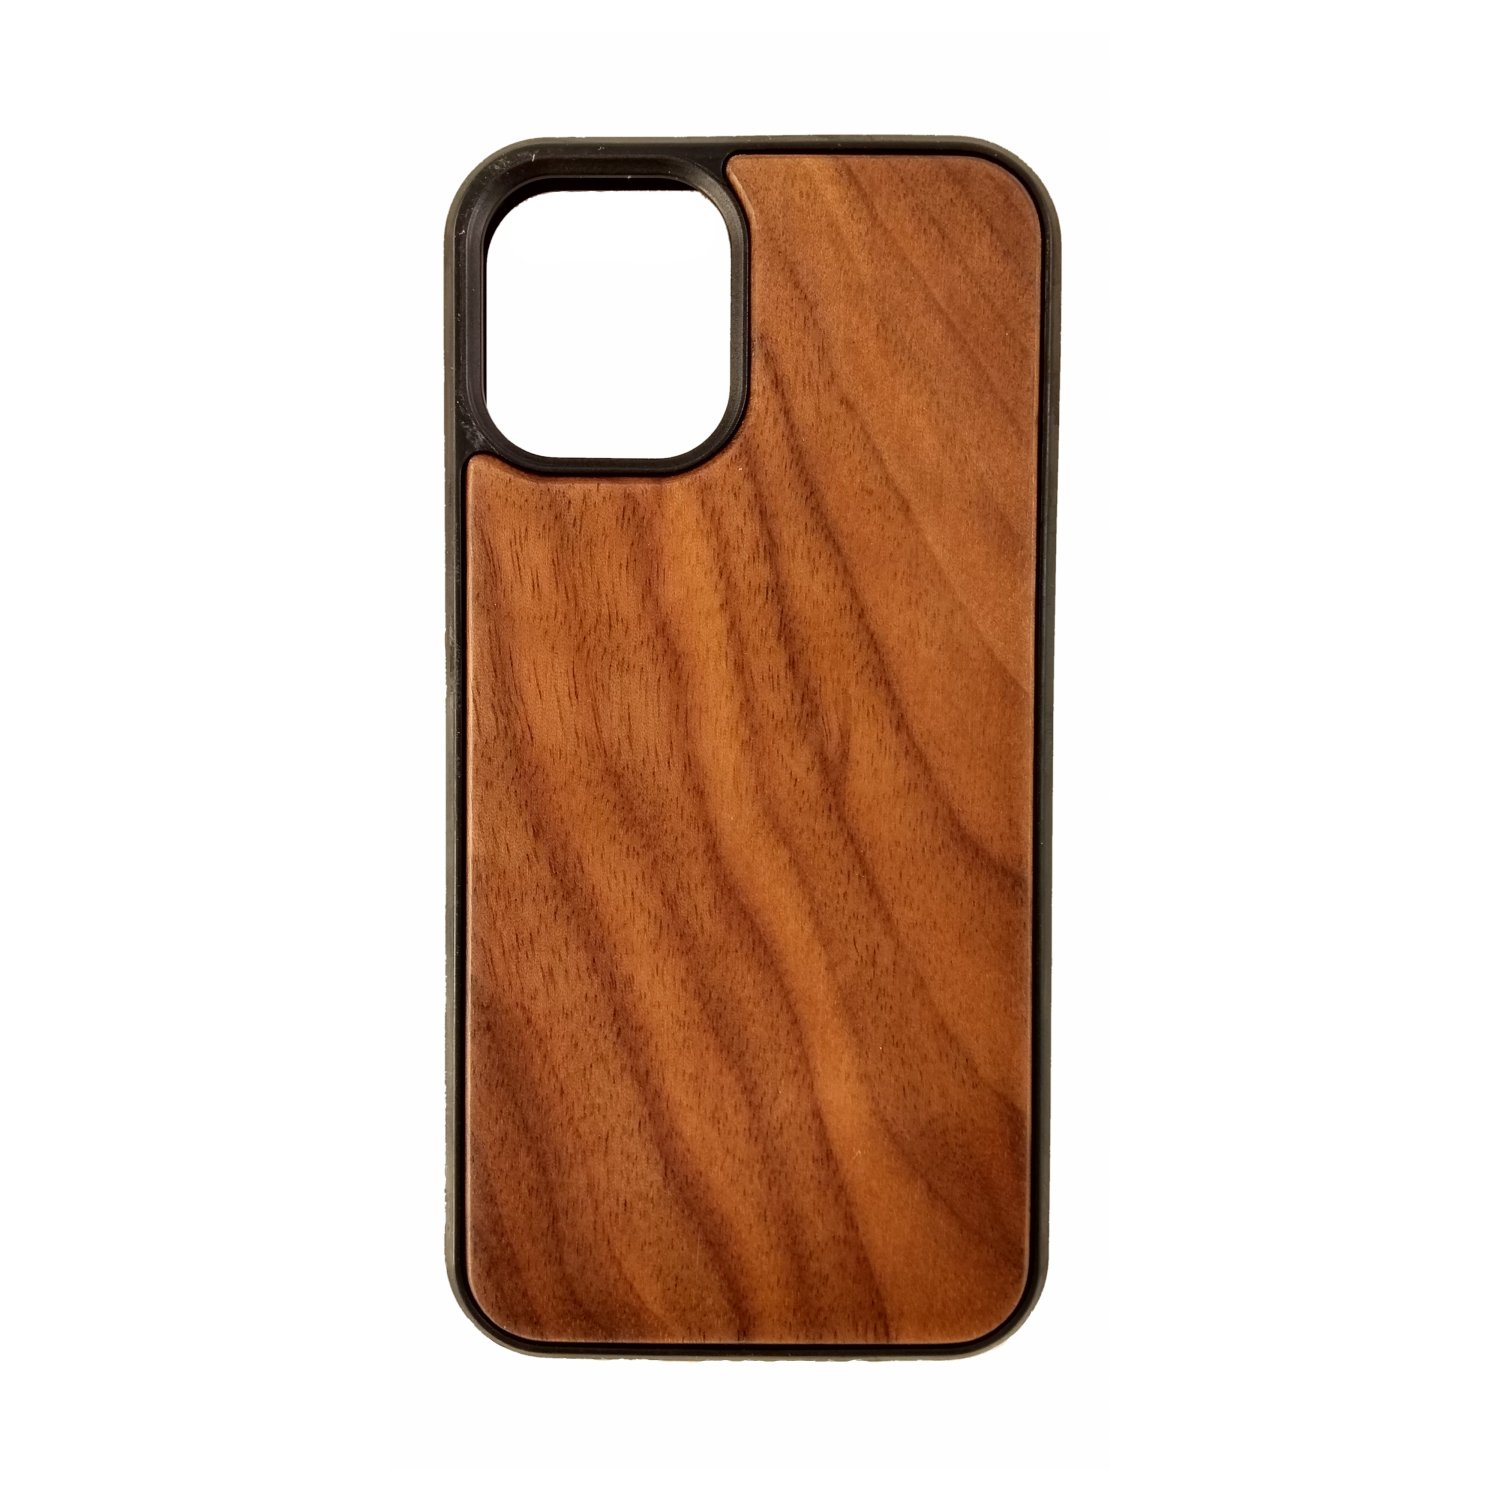 Wooden and plastic protective cover for Iphone 12 mini